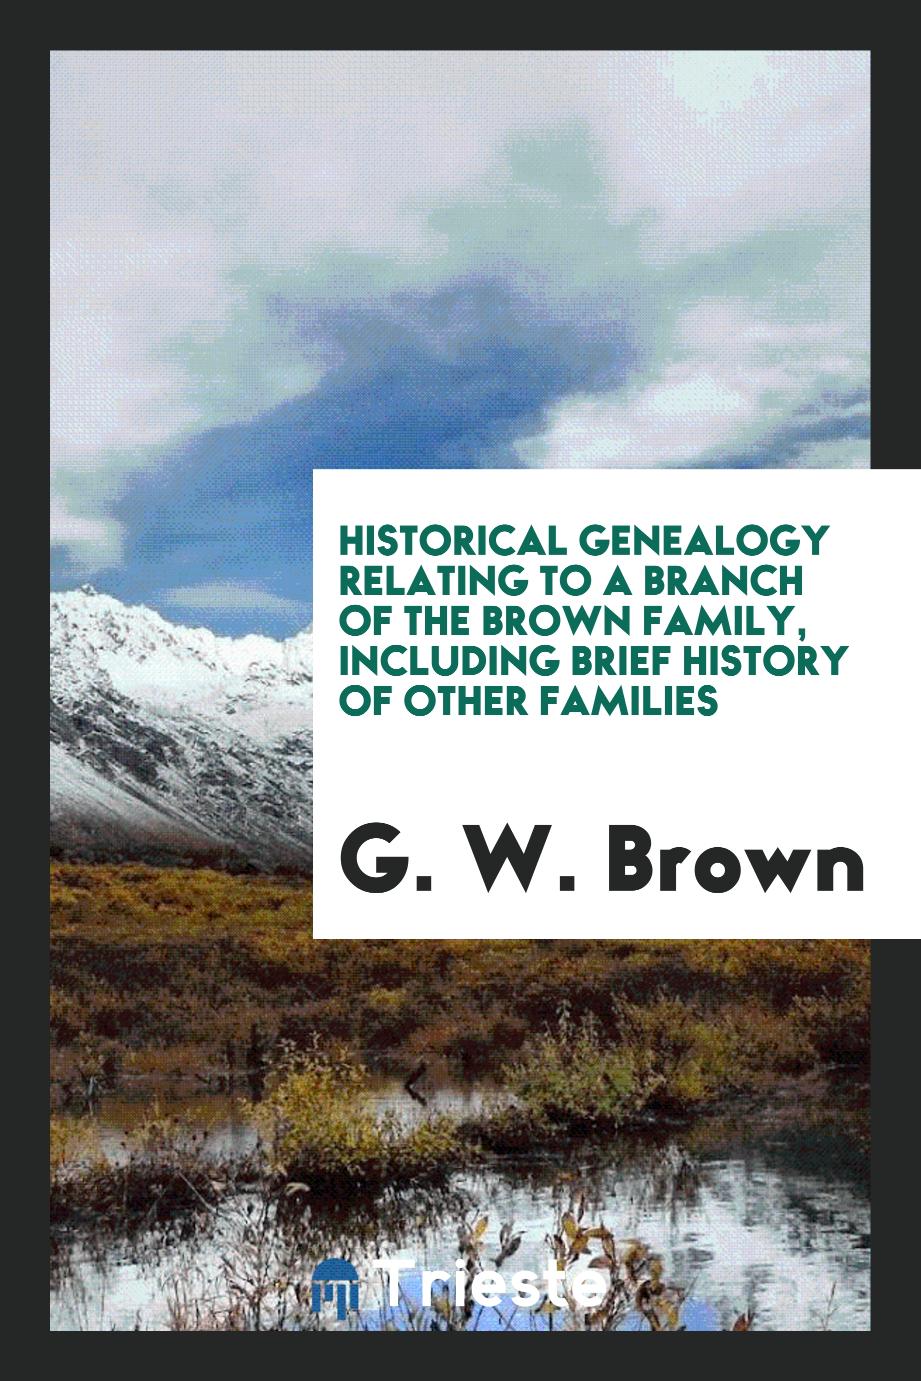 Historical Genealogy Relating to a Branch of the Brown Family, including Brief History of Other Families